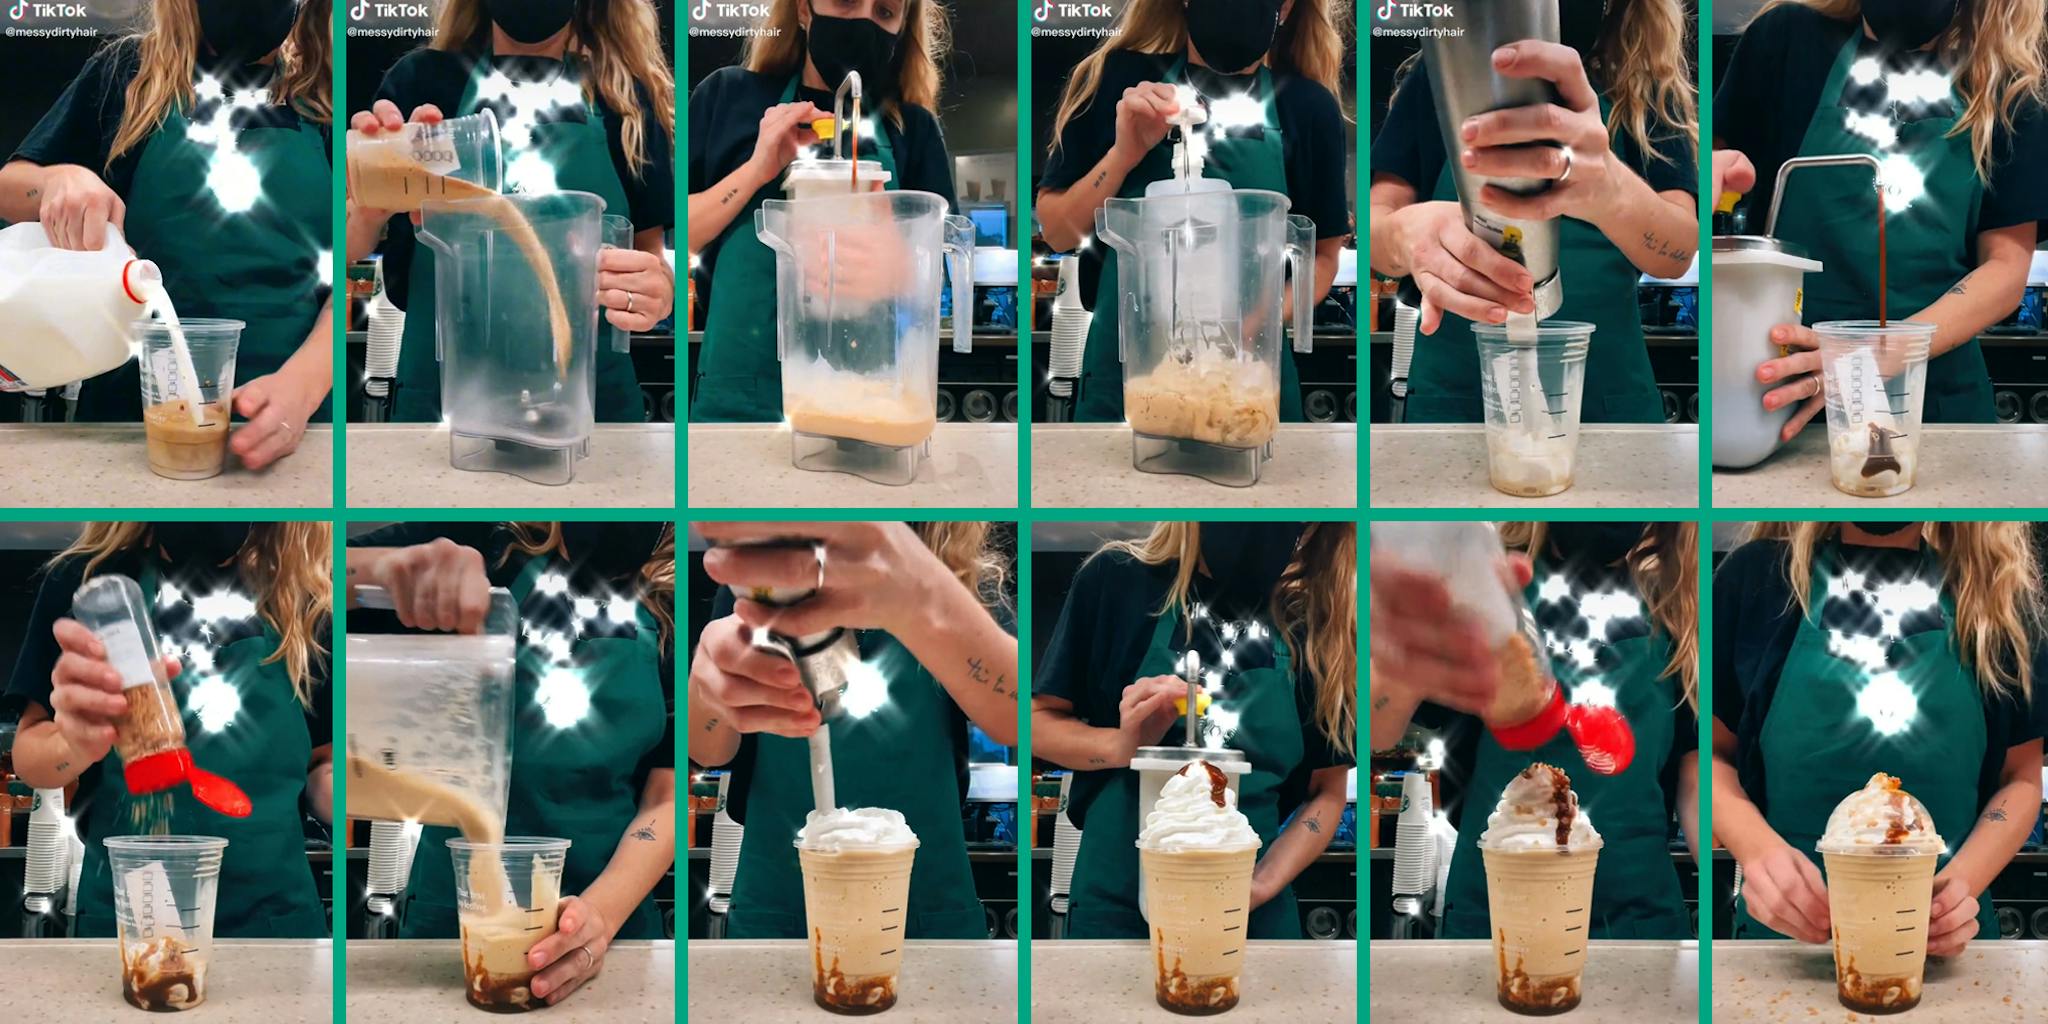 ‘Asking for a frap is the worst thing you can do at Starbucks’: Workers put customers who order Frappuccinos on blast in viral TikTok